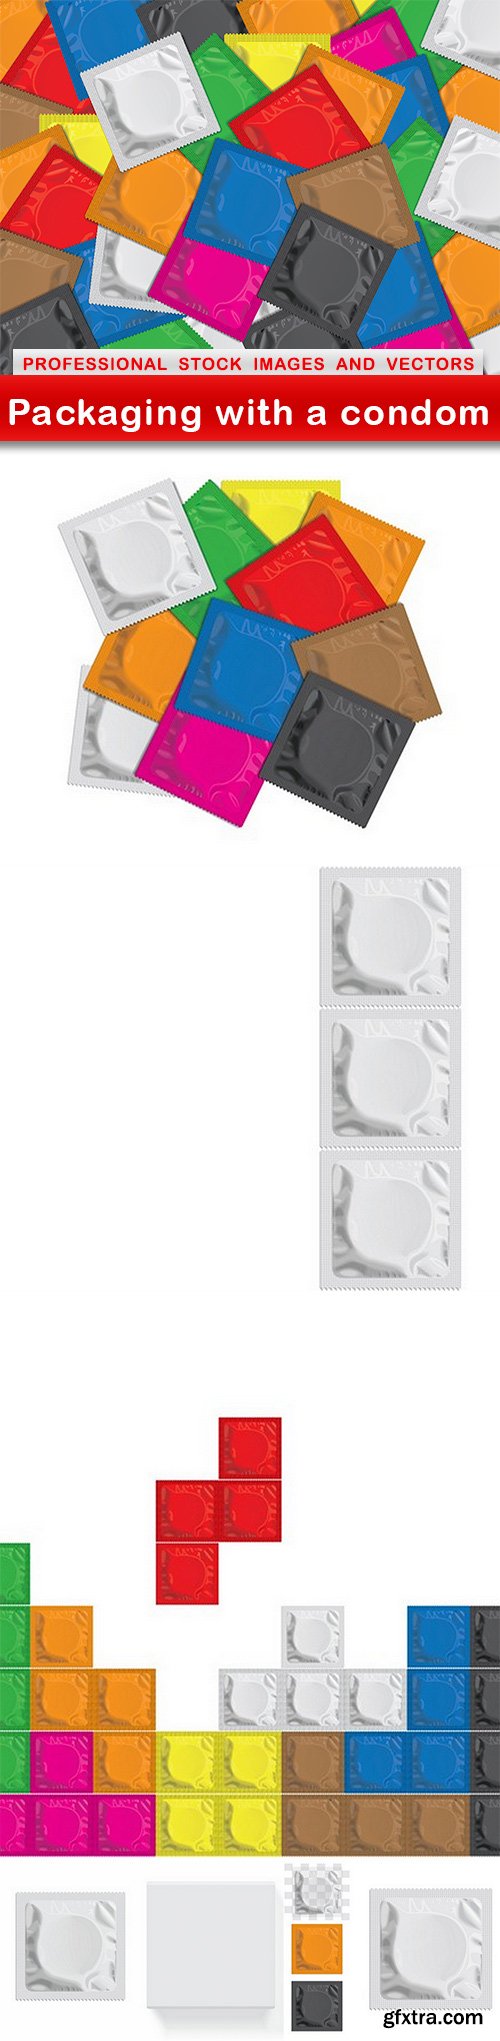 Packaging with a condom - 6 EPS